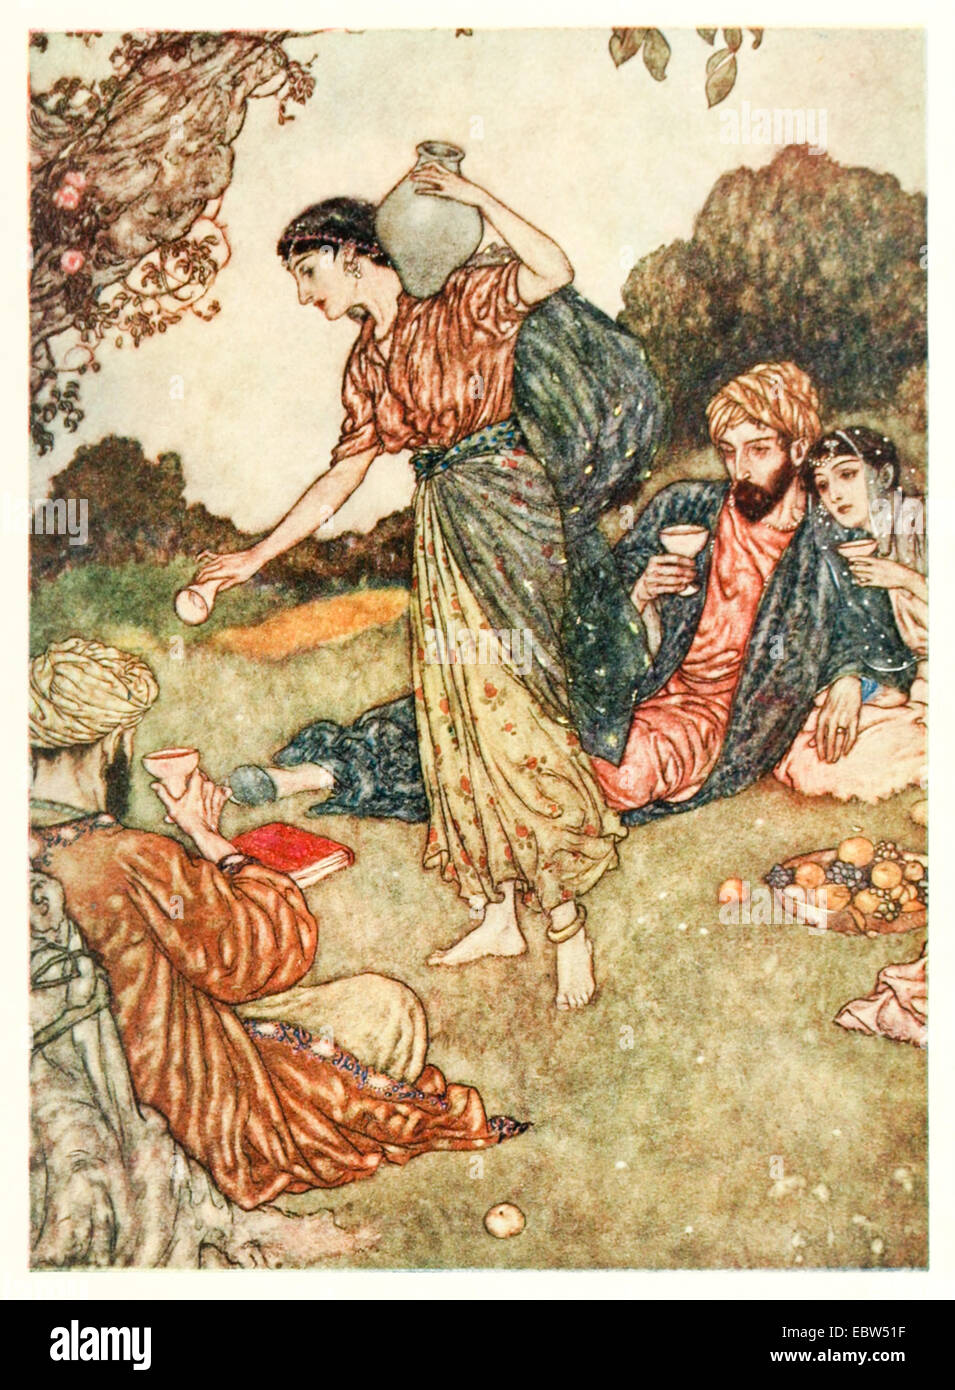 'And when like her, oh, Saki' - Edmund Dulac illustration from ‘Rubáiyát of Omar Khayyám’. See description for more information Stock Photo